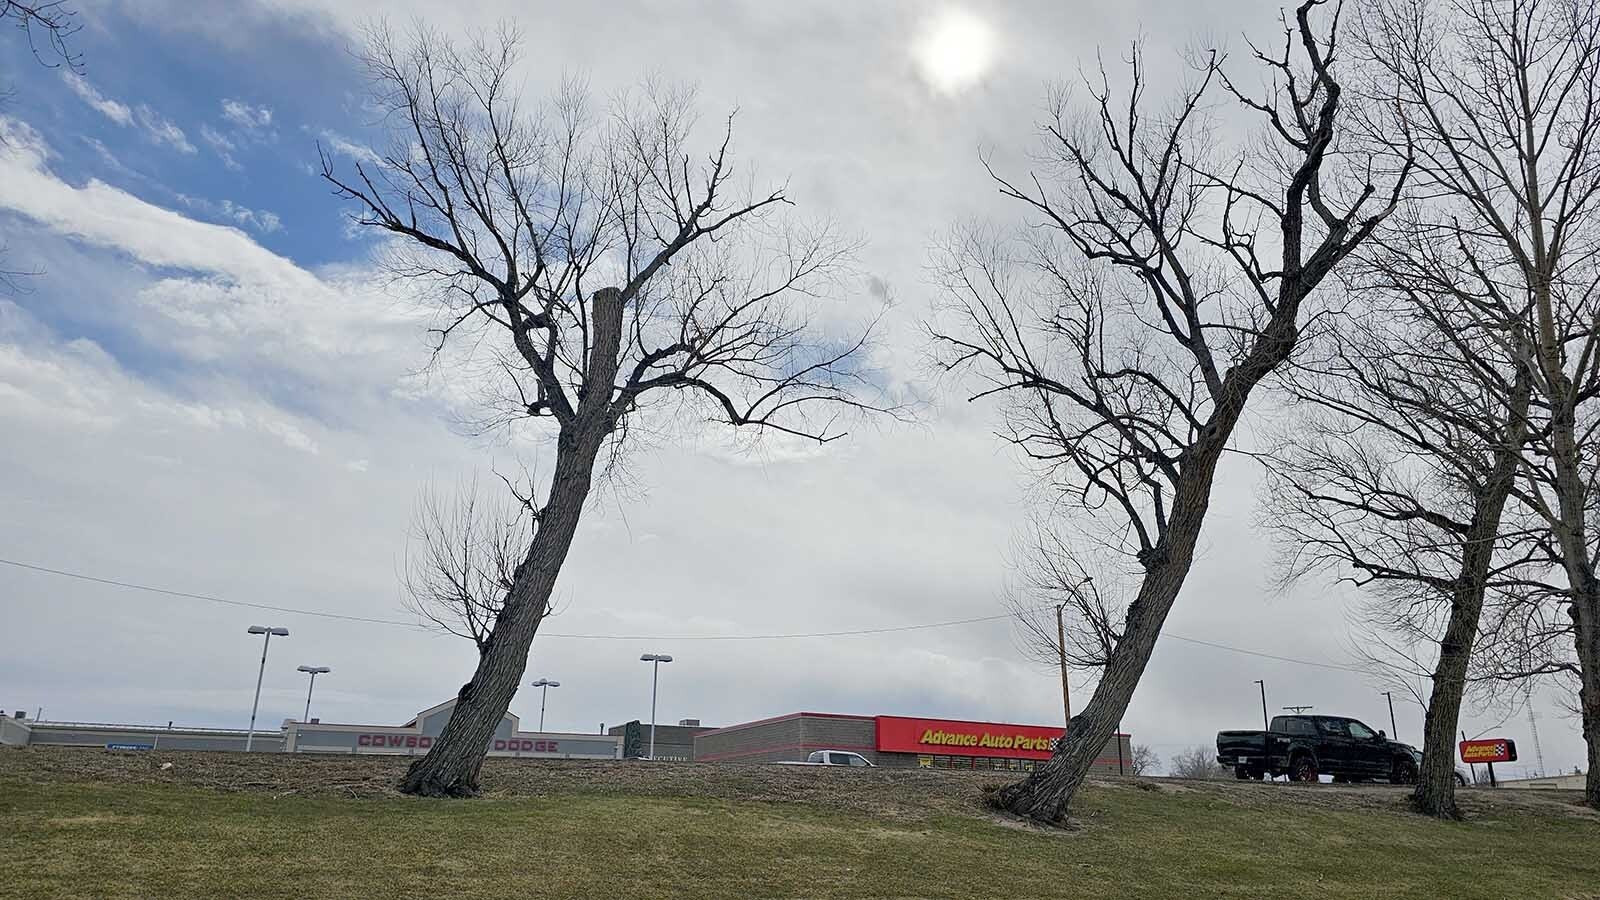 These trees have lost tops and are likely not long for this world.